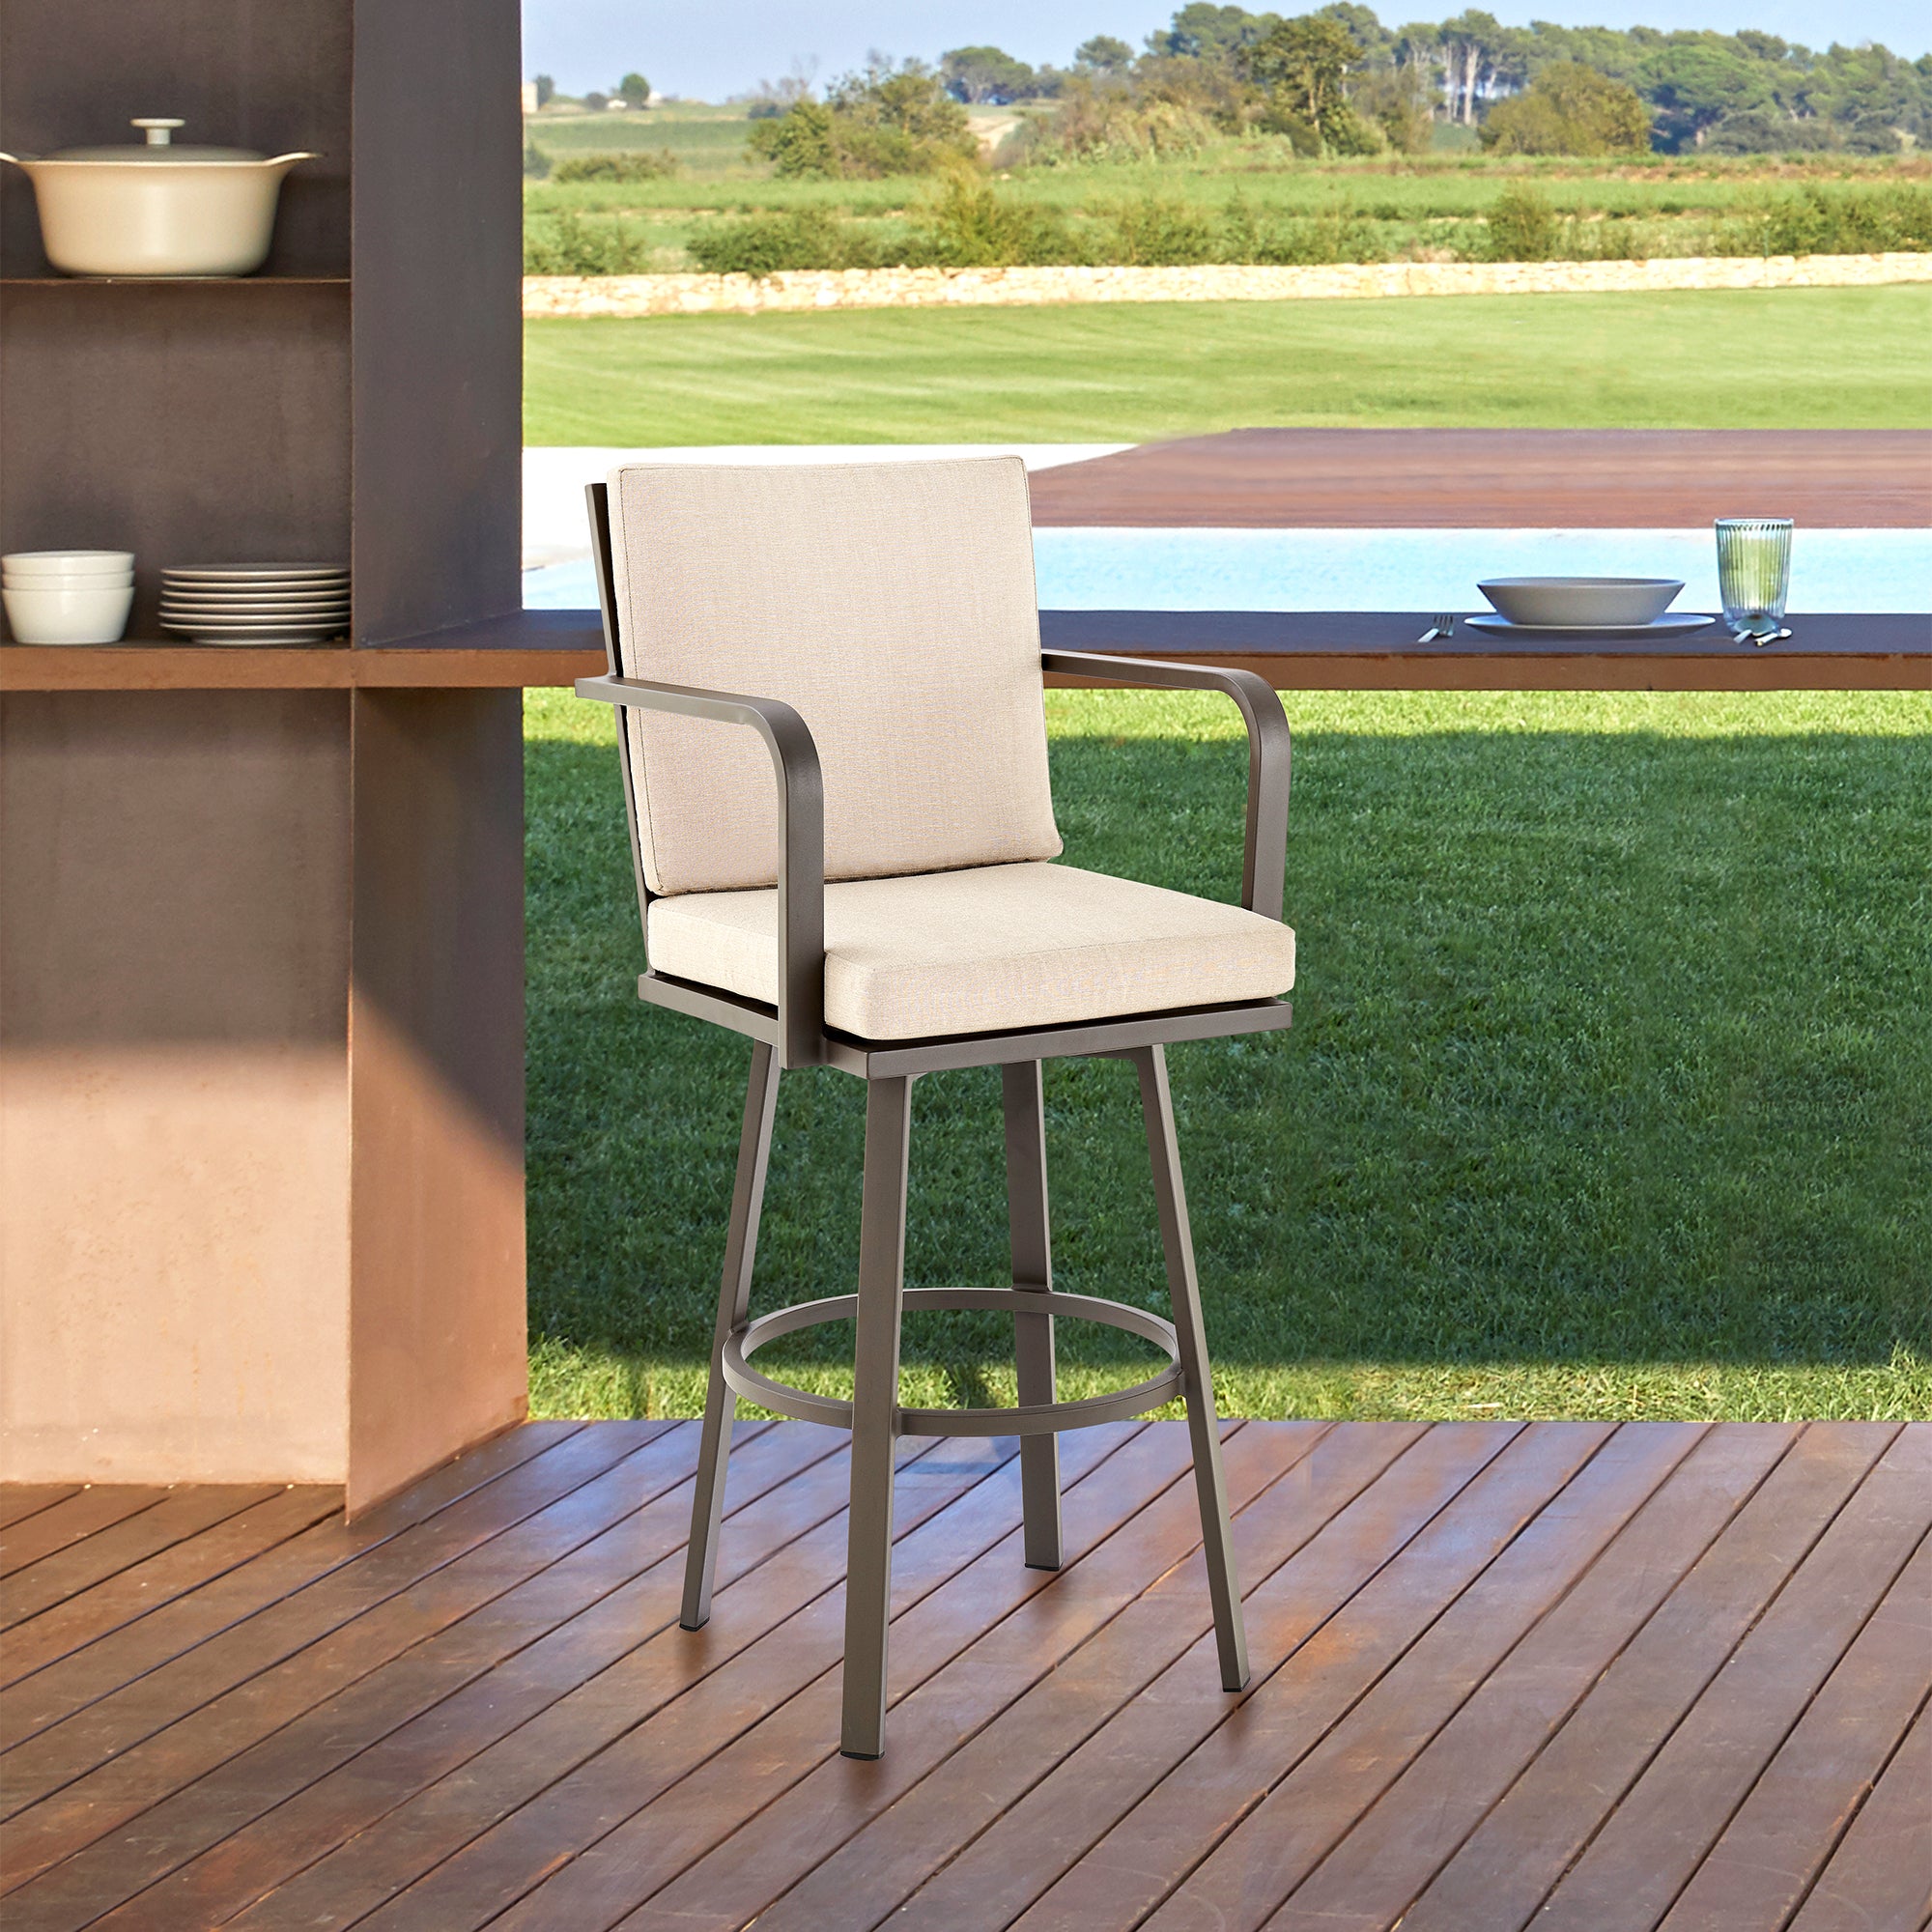 Armen Living - Don Outdoor Patio Bar or Counter Stool in Aluminum with Cushions - 840254332492